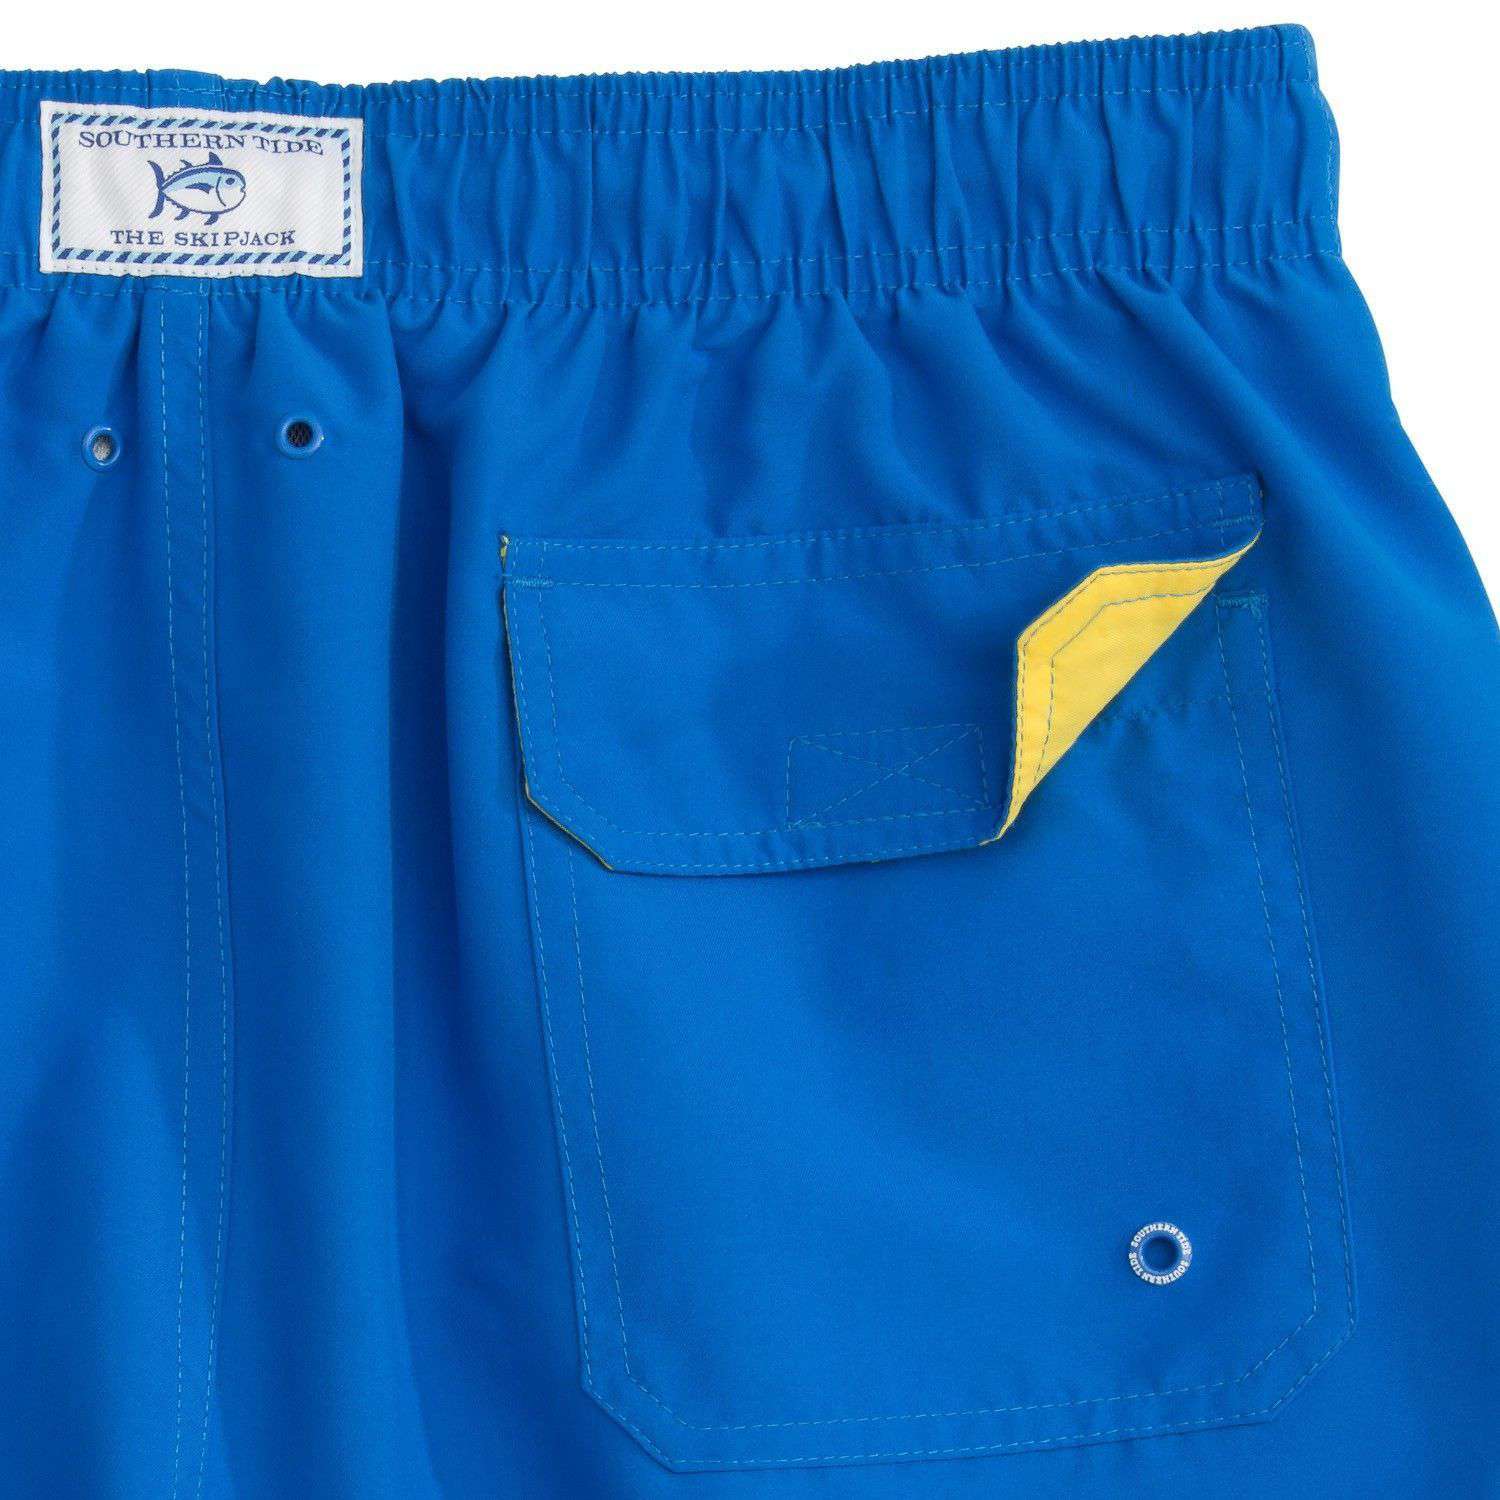 Solid Swim Trunks in Royal Blue by Southern Tide - Country Club Prep